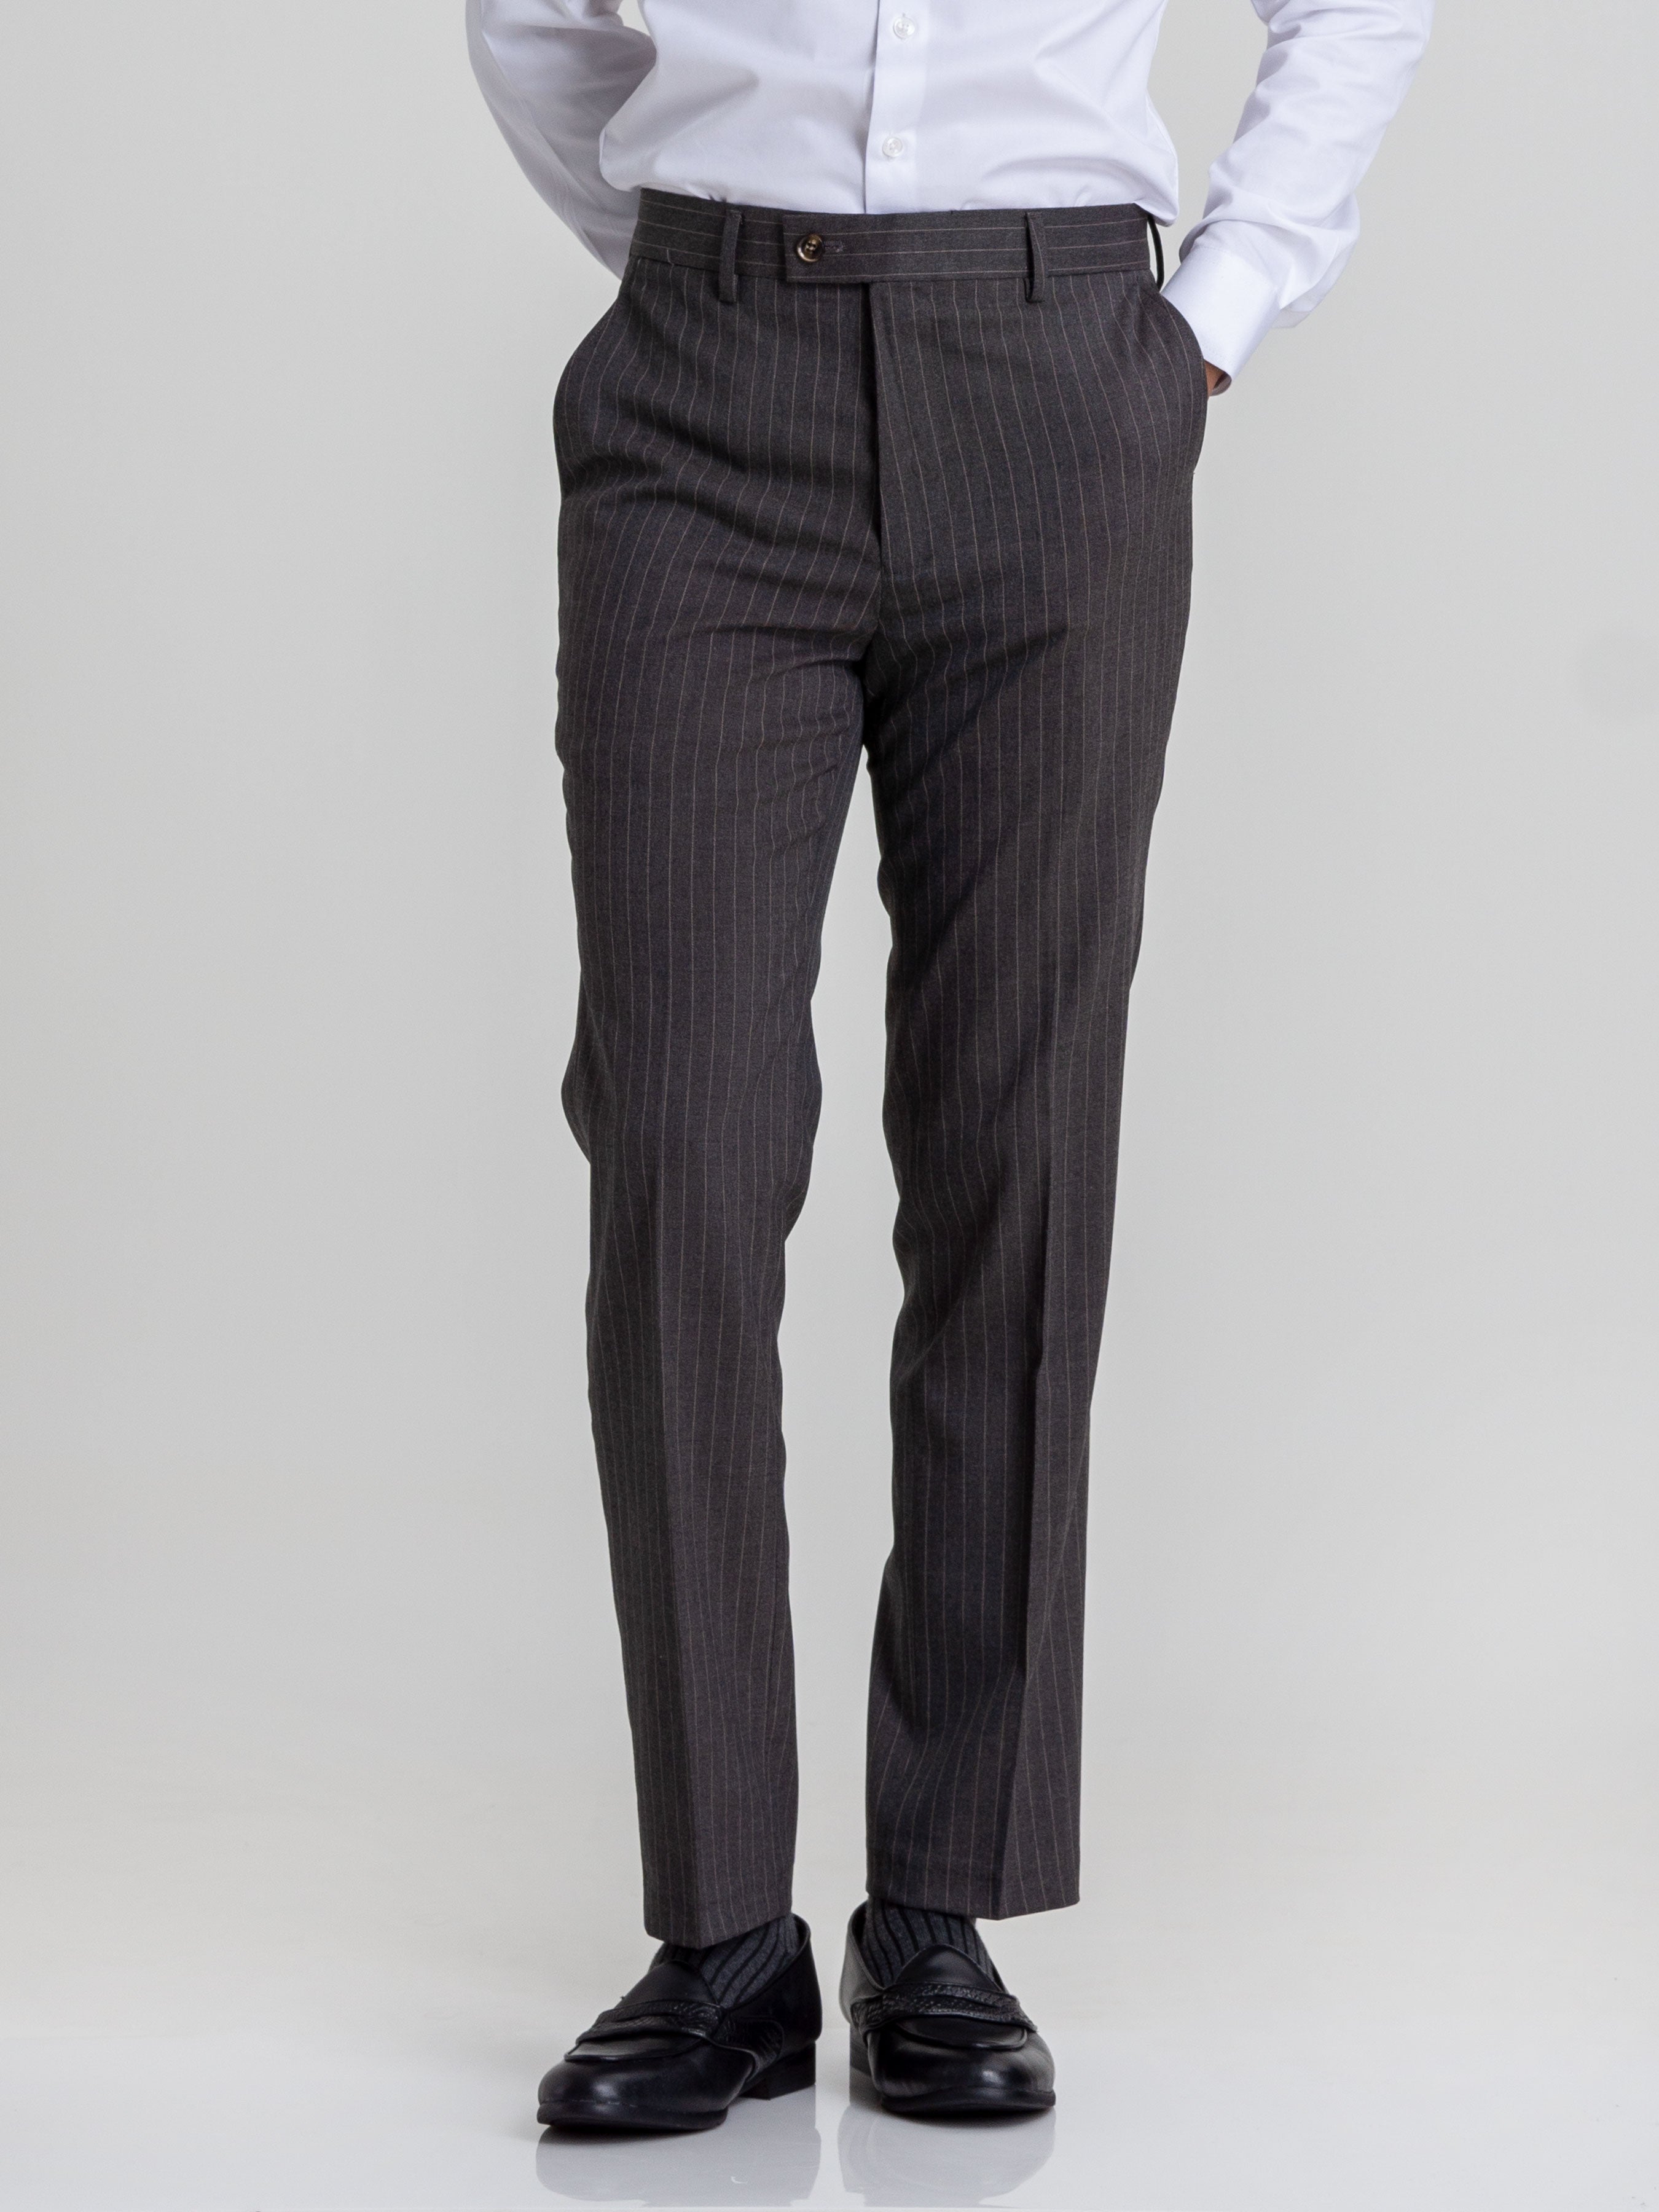 Trousers With Belt Loop - Dark Grey With Brown Stripes (Stretchable) - Zeve Shoes